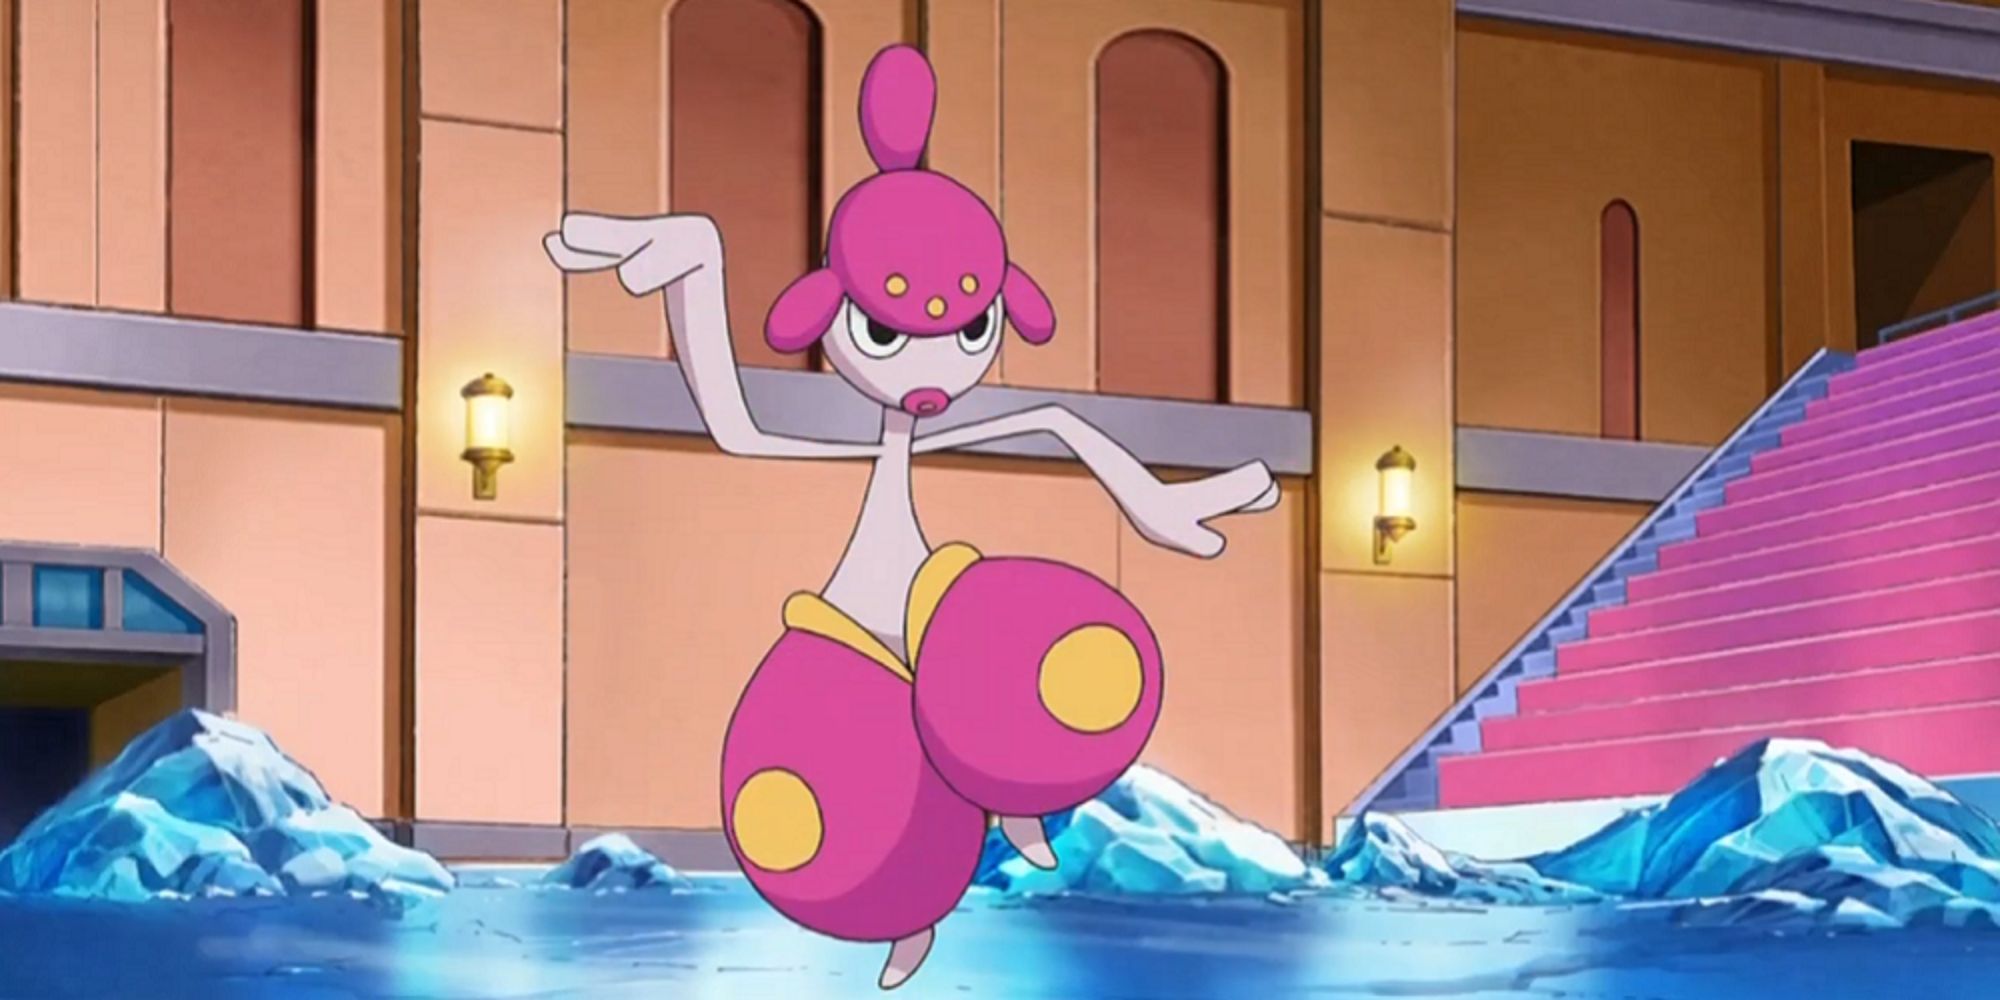 Pokmeon: Medicham stands on one leg, arms outstretched in yoga pose.